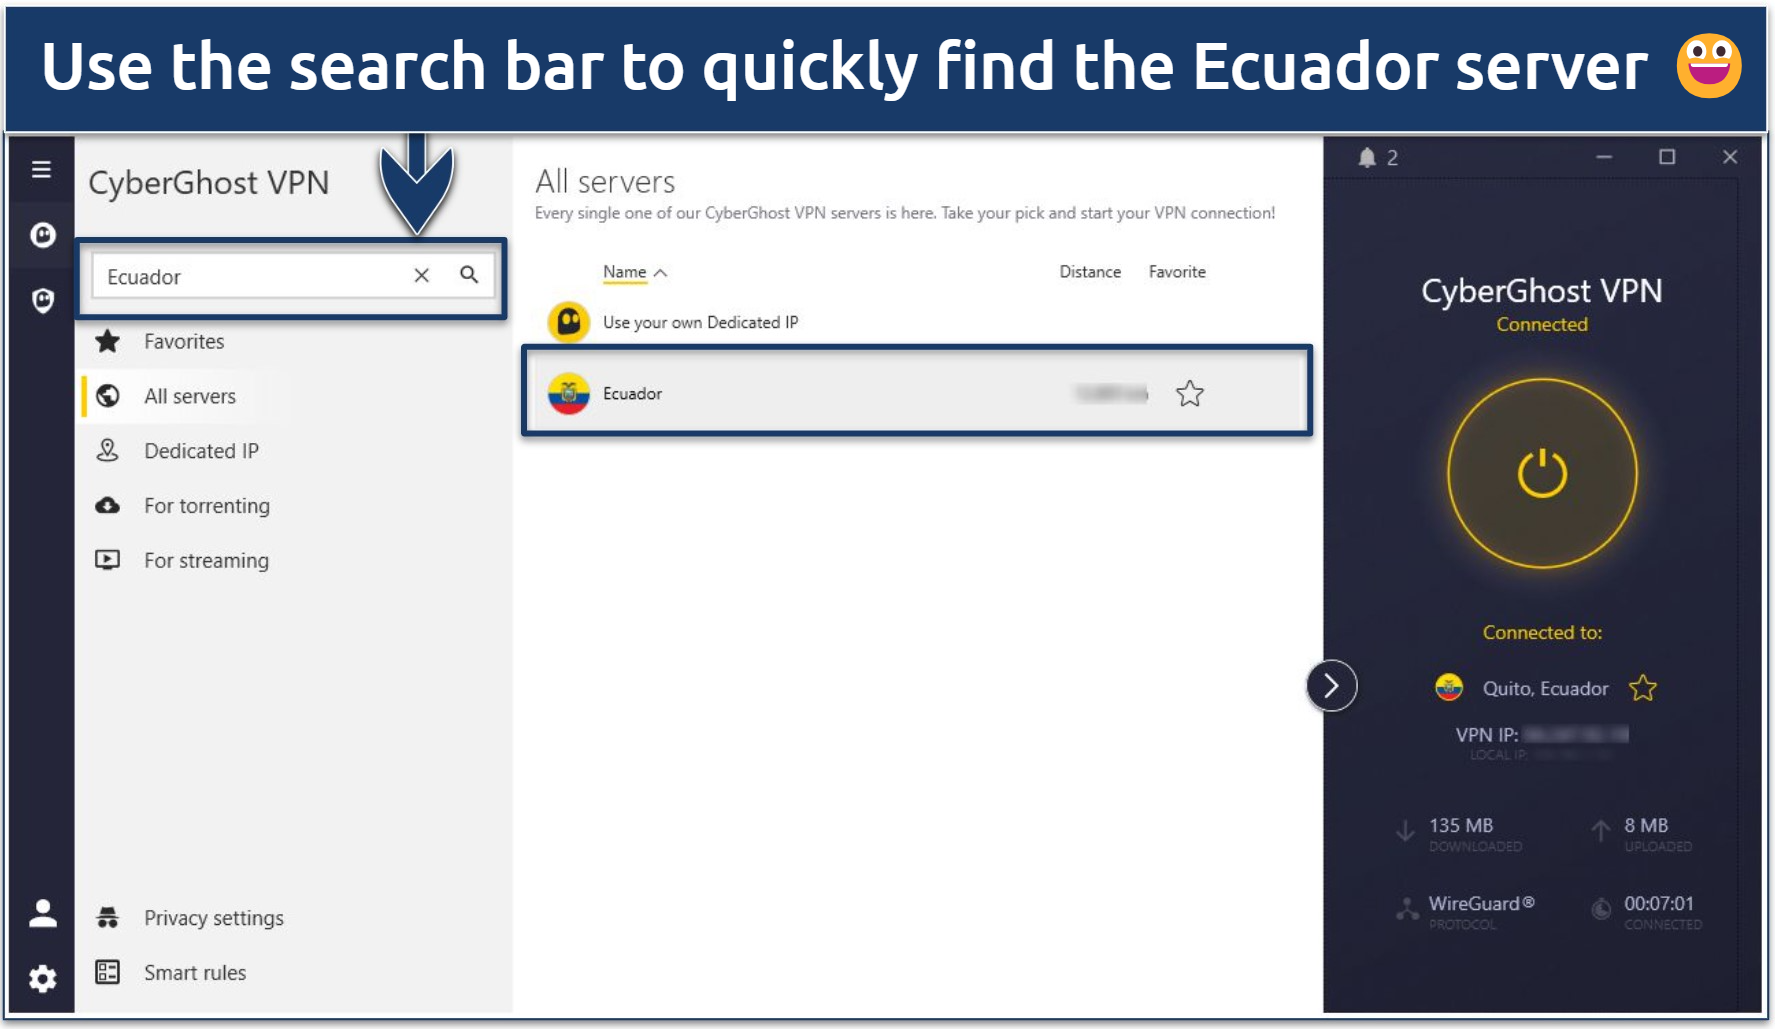 Screenshot of the CyberGhost interface showing how to quickly find the Ecuador server